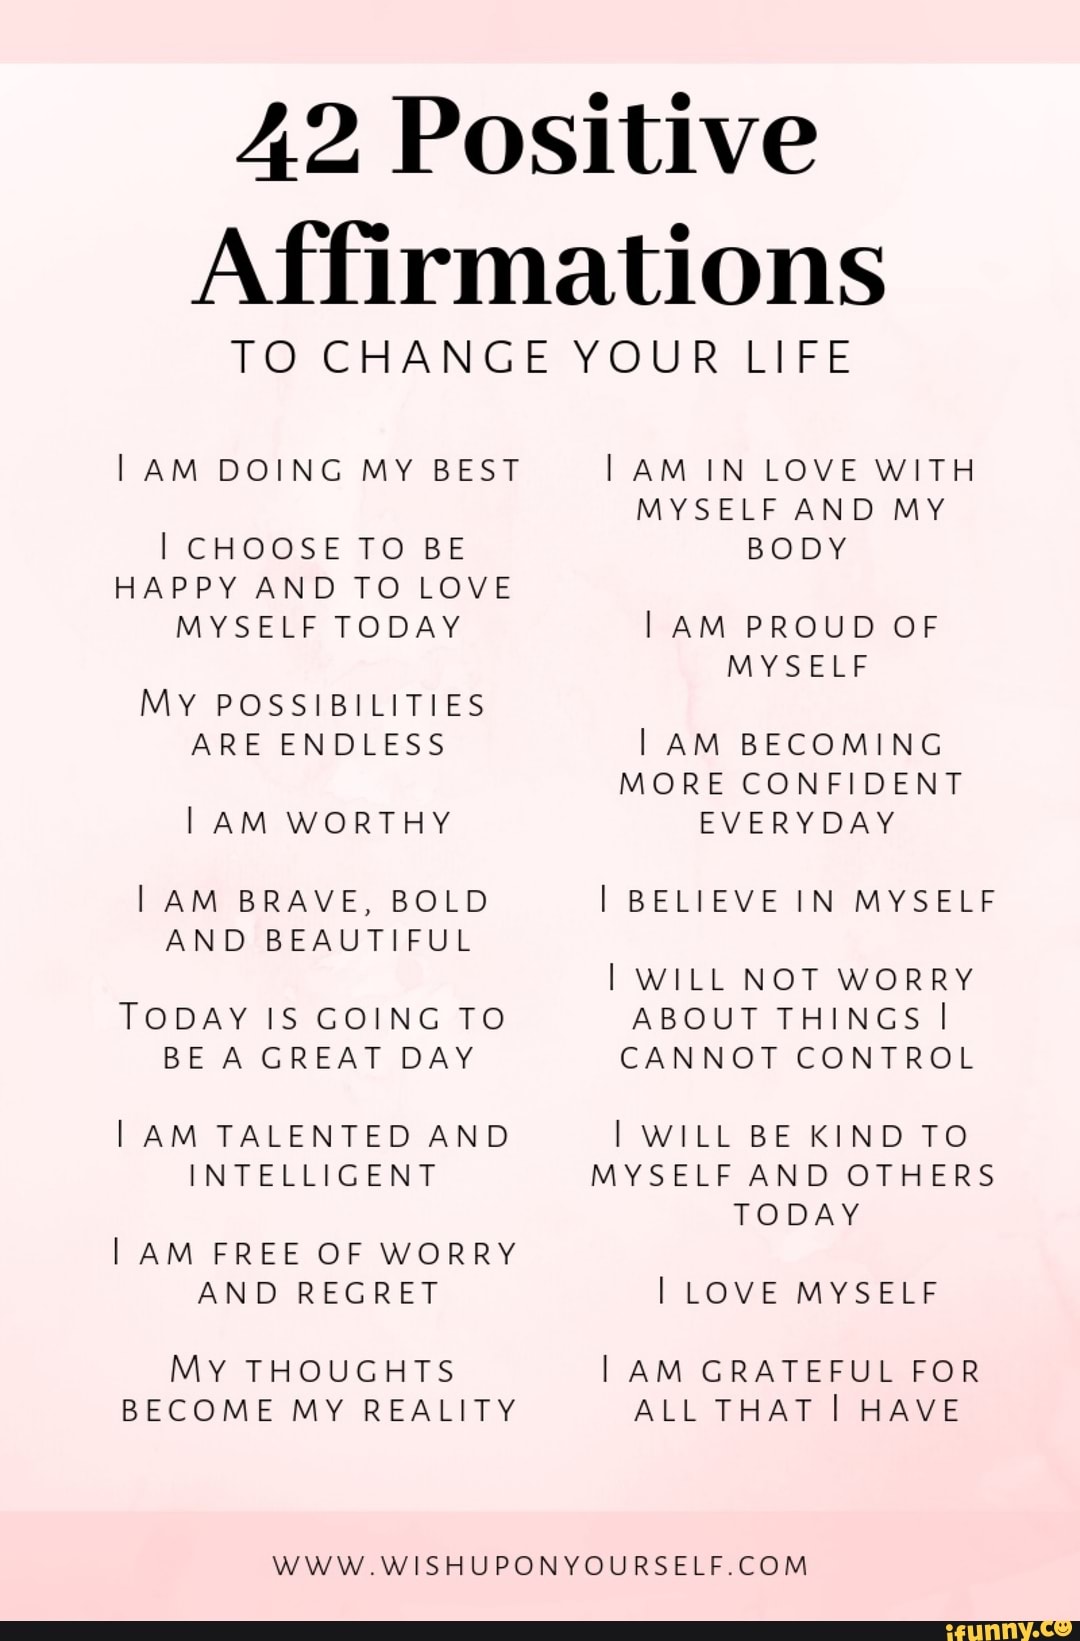 42-positive-affirmations-to-change-your-life-i-am-doing-my-best-i-happy-and-to-love-myself